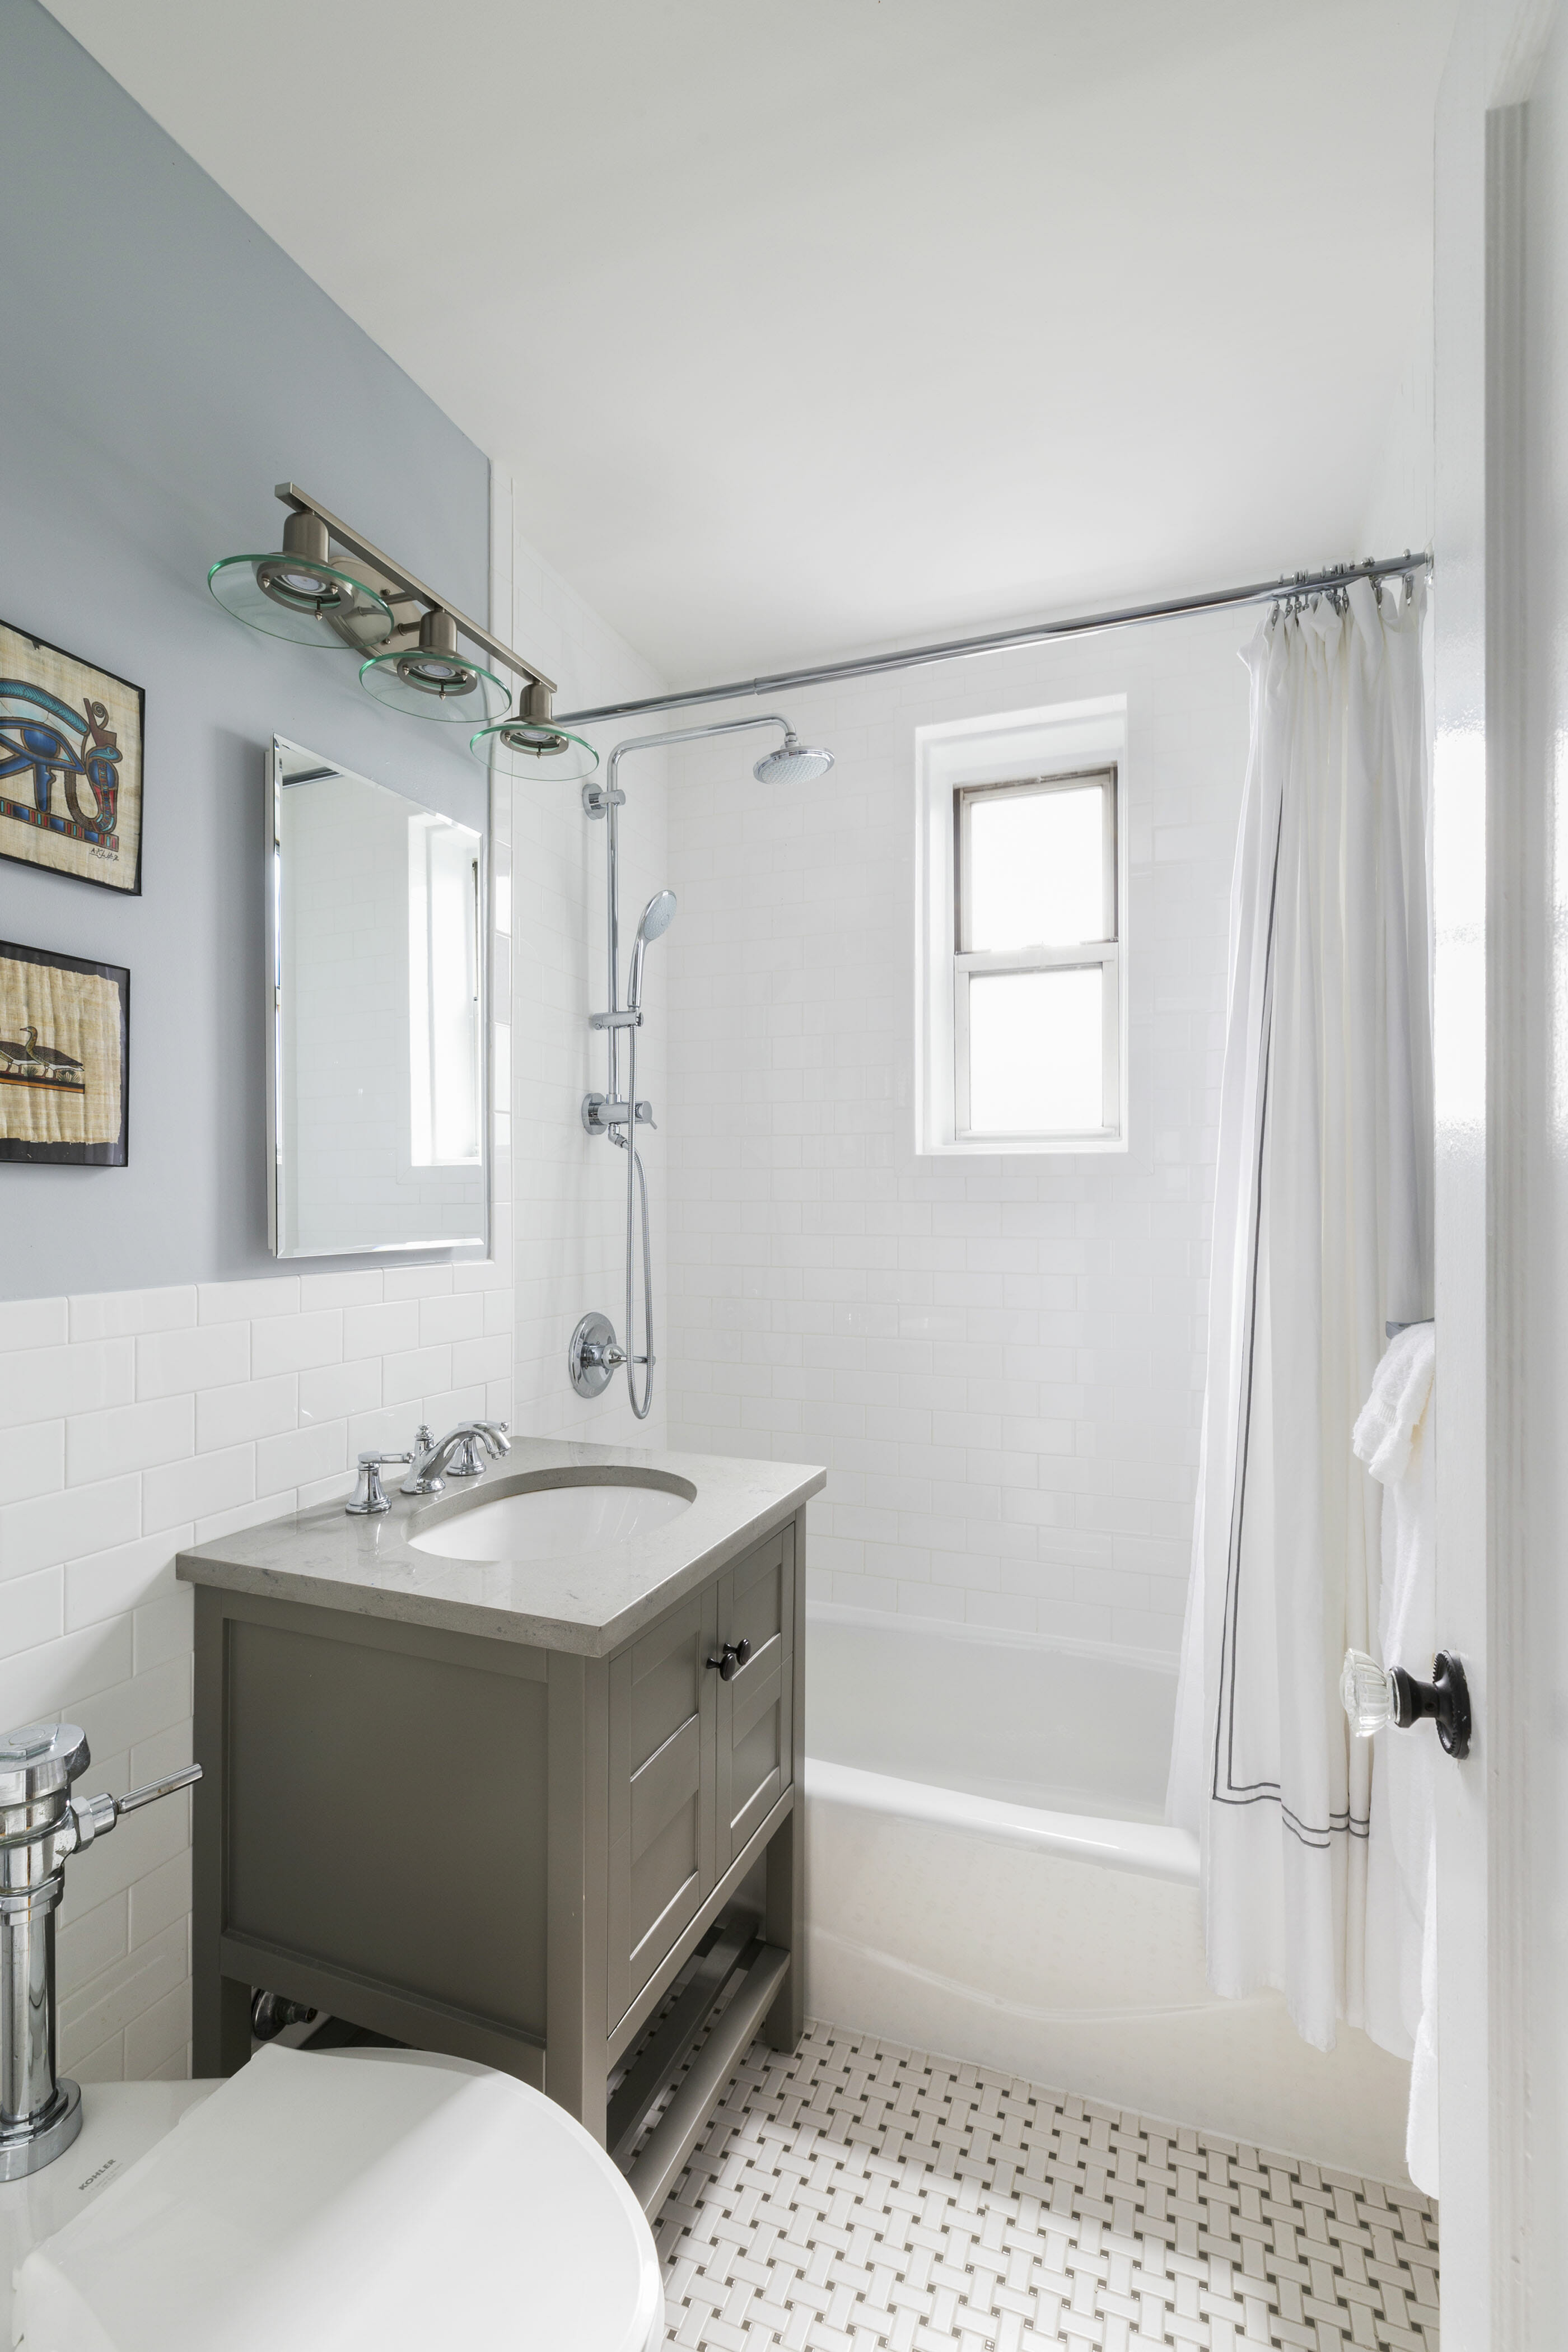 bathroom vanity with undermount porcelain sink and mirror and white tiles on half walls and gray walls and bathtub with a window and floor tiles after renovation